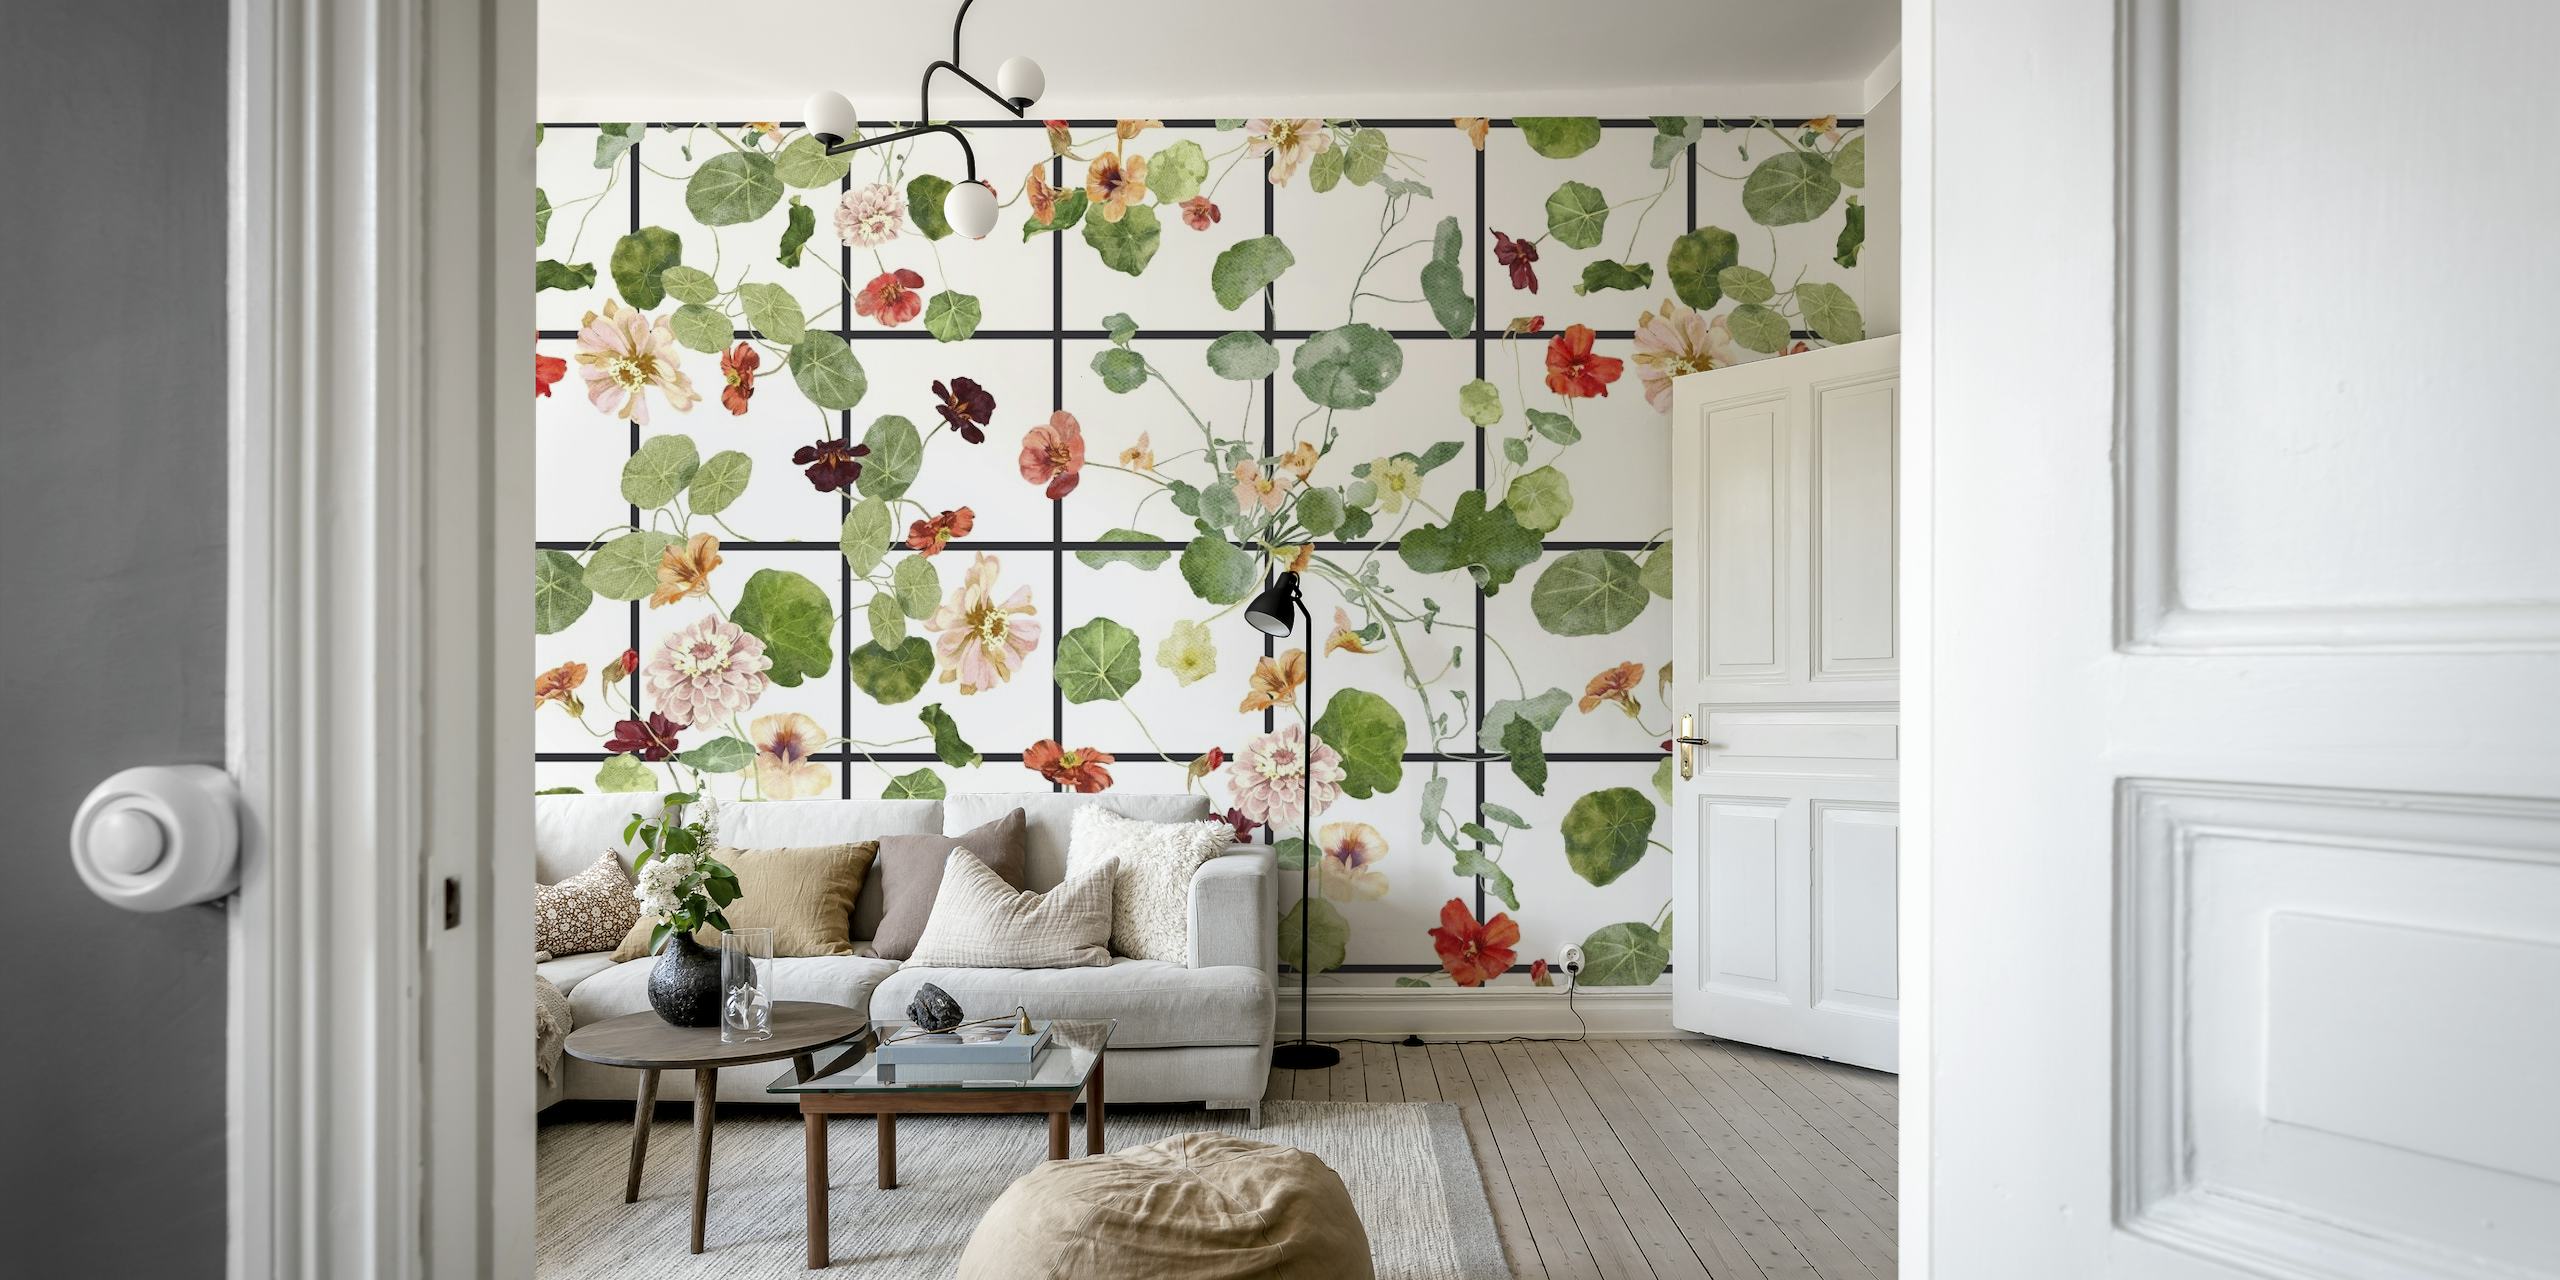 Nasturtium flowers with green leaves on a grid pattern wall mural.